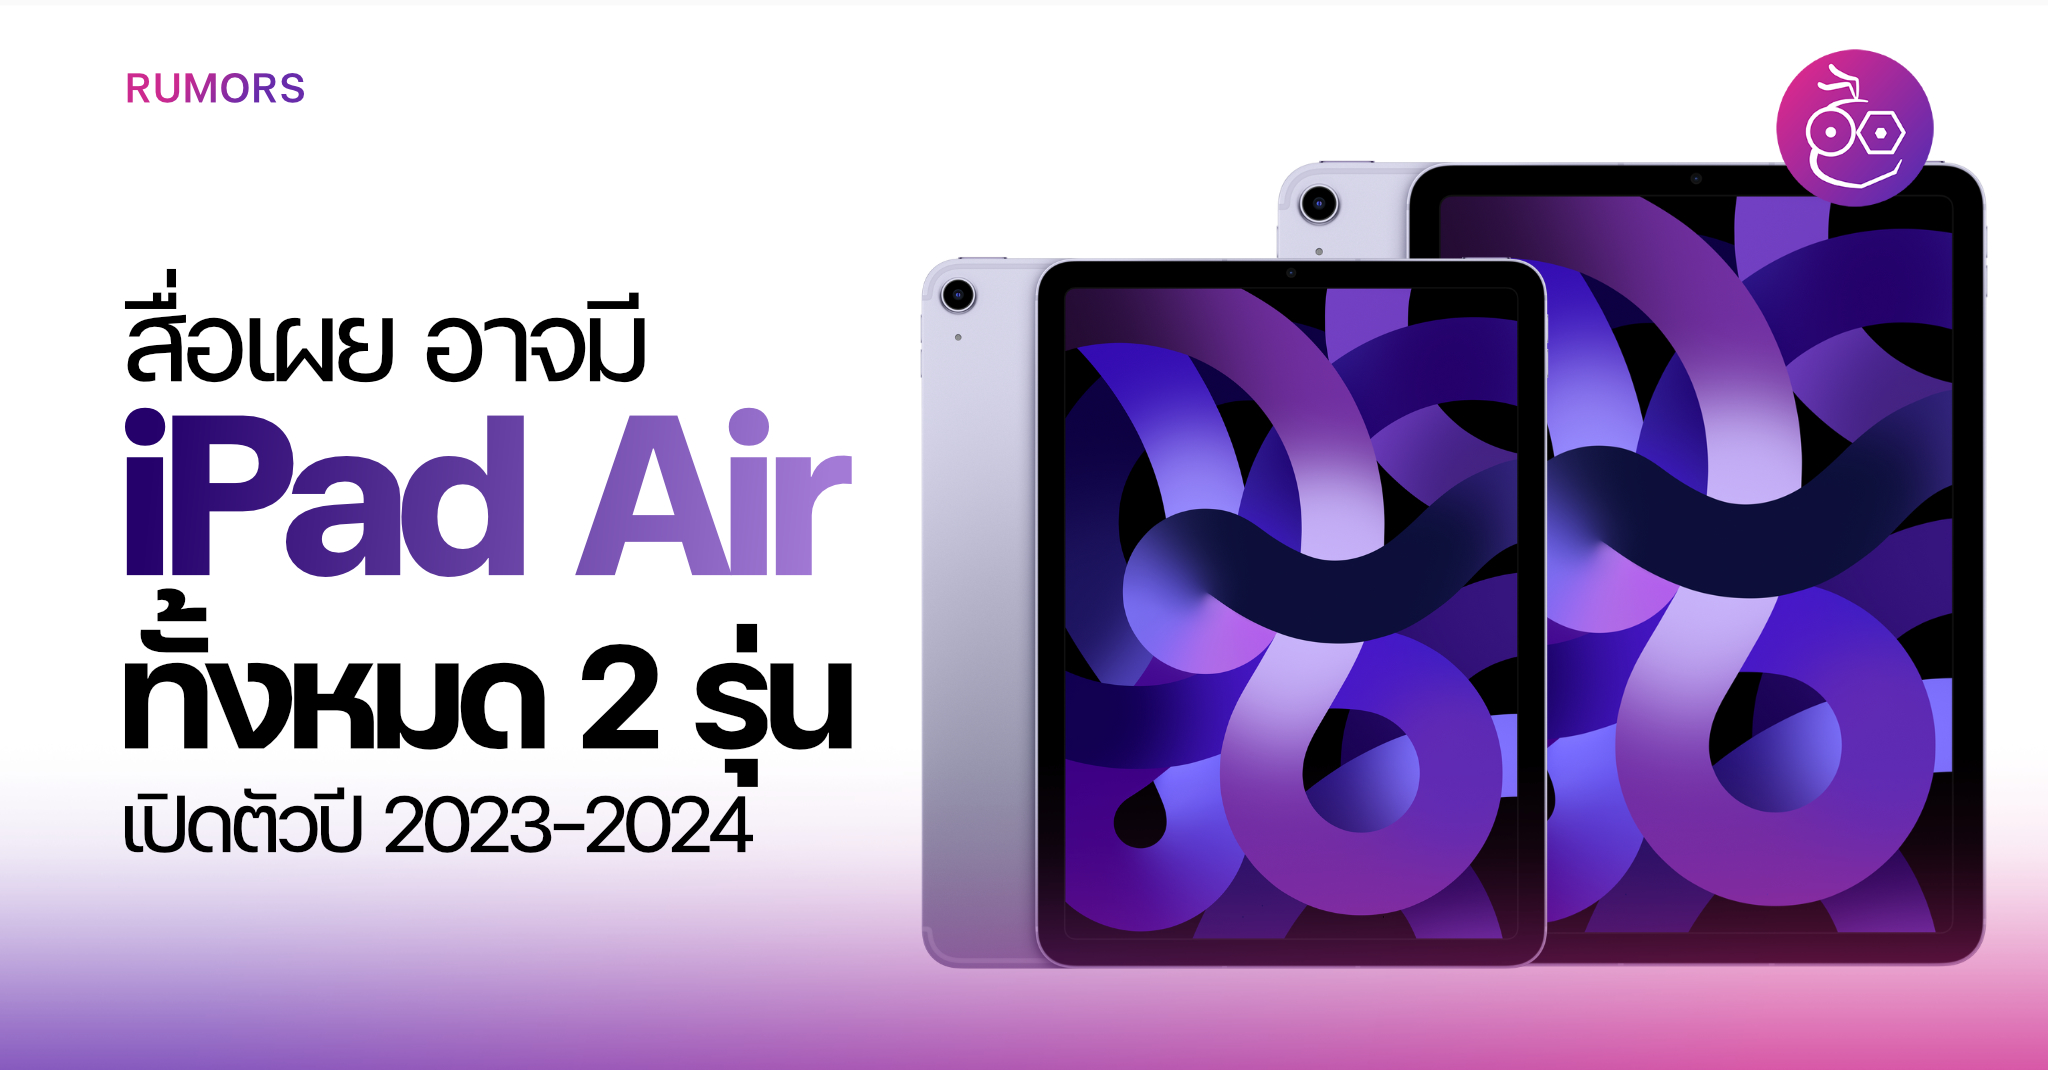 The new iPad Air may have two models, expected to be launched in 2023